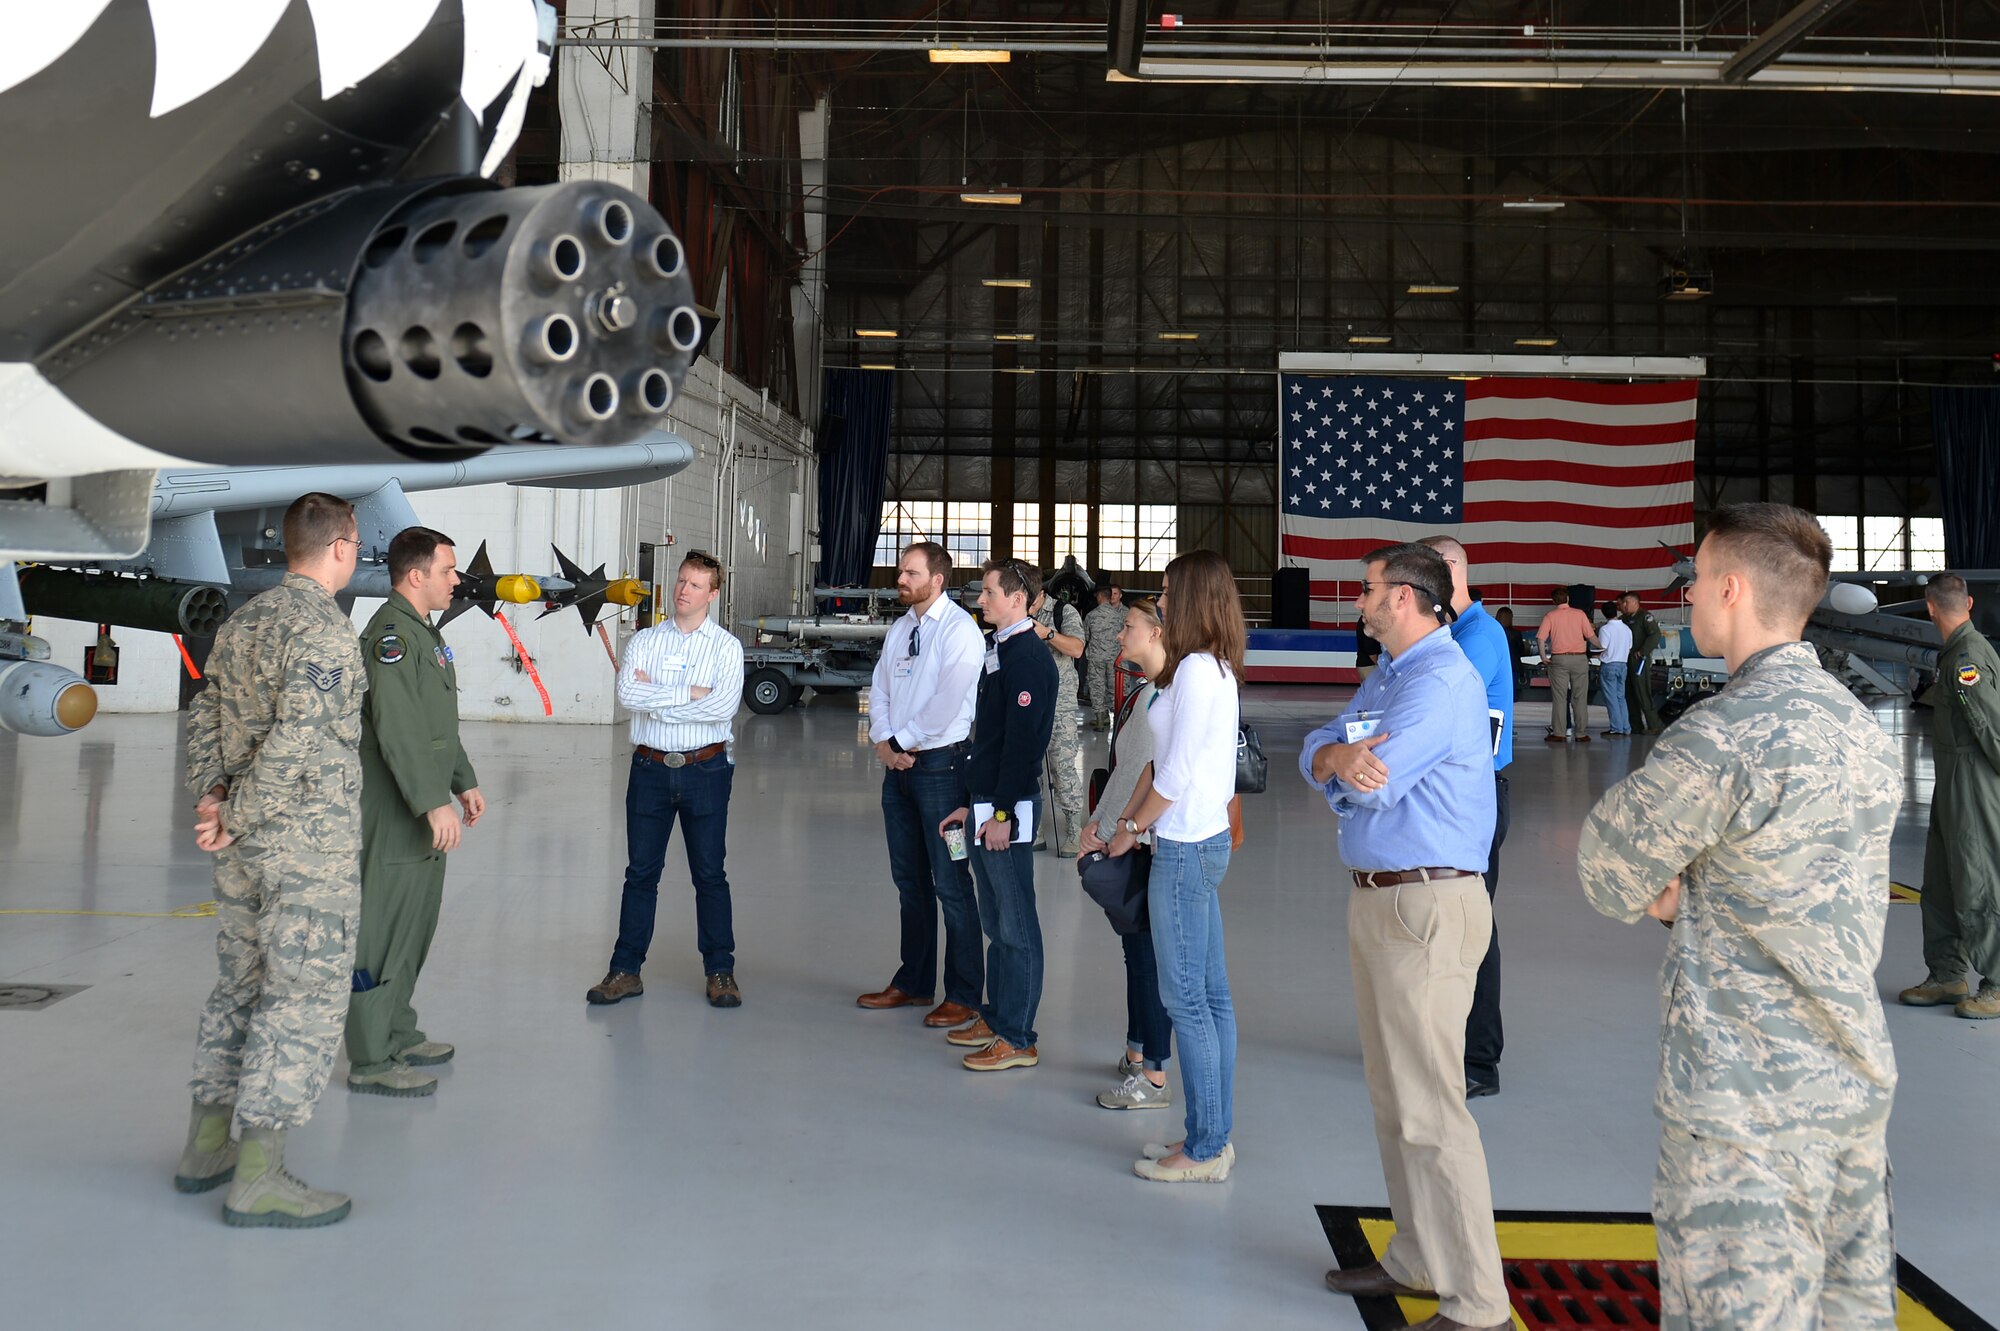 Congressional staff members are briefed on the functions of the A-10C Thunderbolt II during an East Coast Airpower Demonstration static displays tour at Shaw Air Force Base, S.C., Oct. 28, 2016. Staffers learned about the firepower that the A-10 brings to combatant commanders downrange, as well as the support it provides for troop movements. (U.S. Air Force photo by Airman 1st Class Christopher Maldonado)